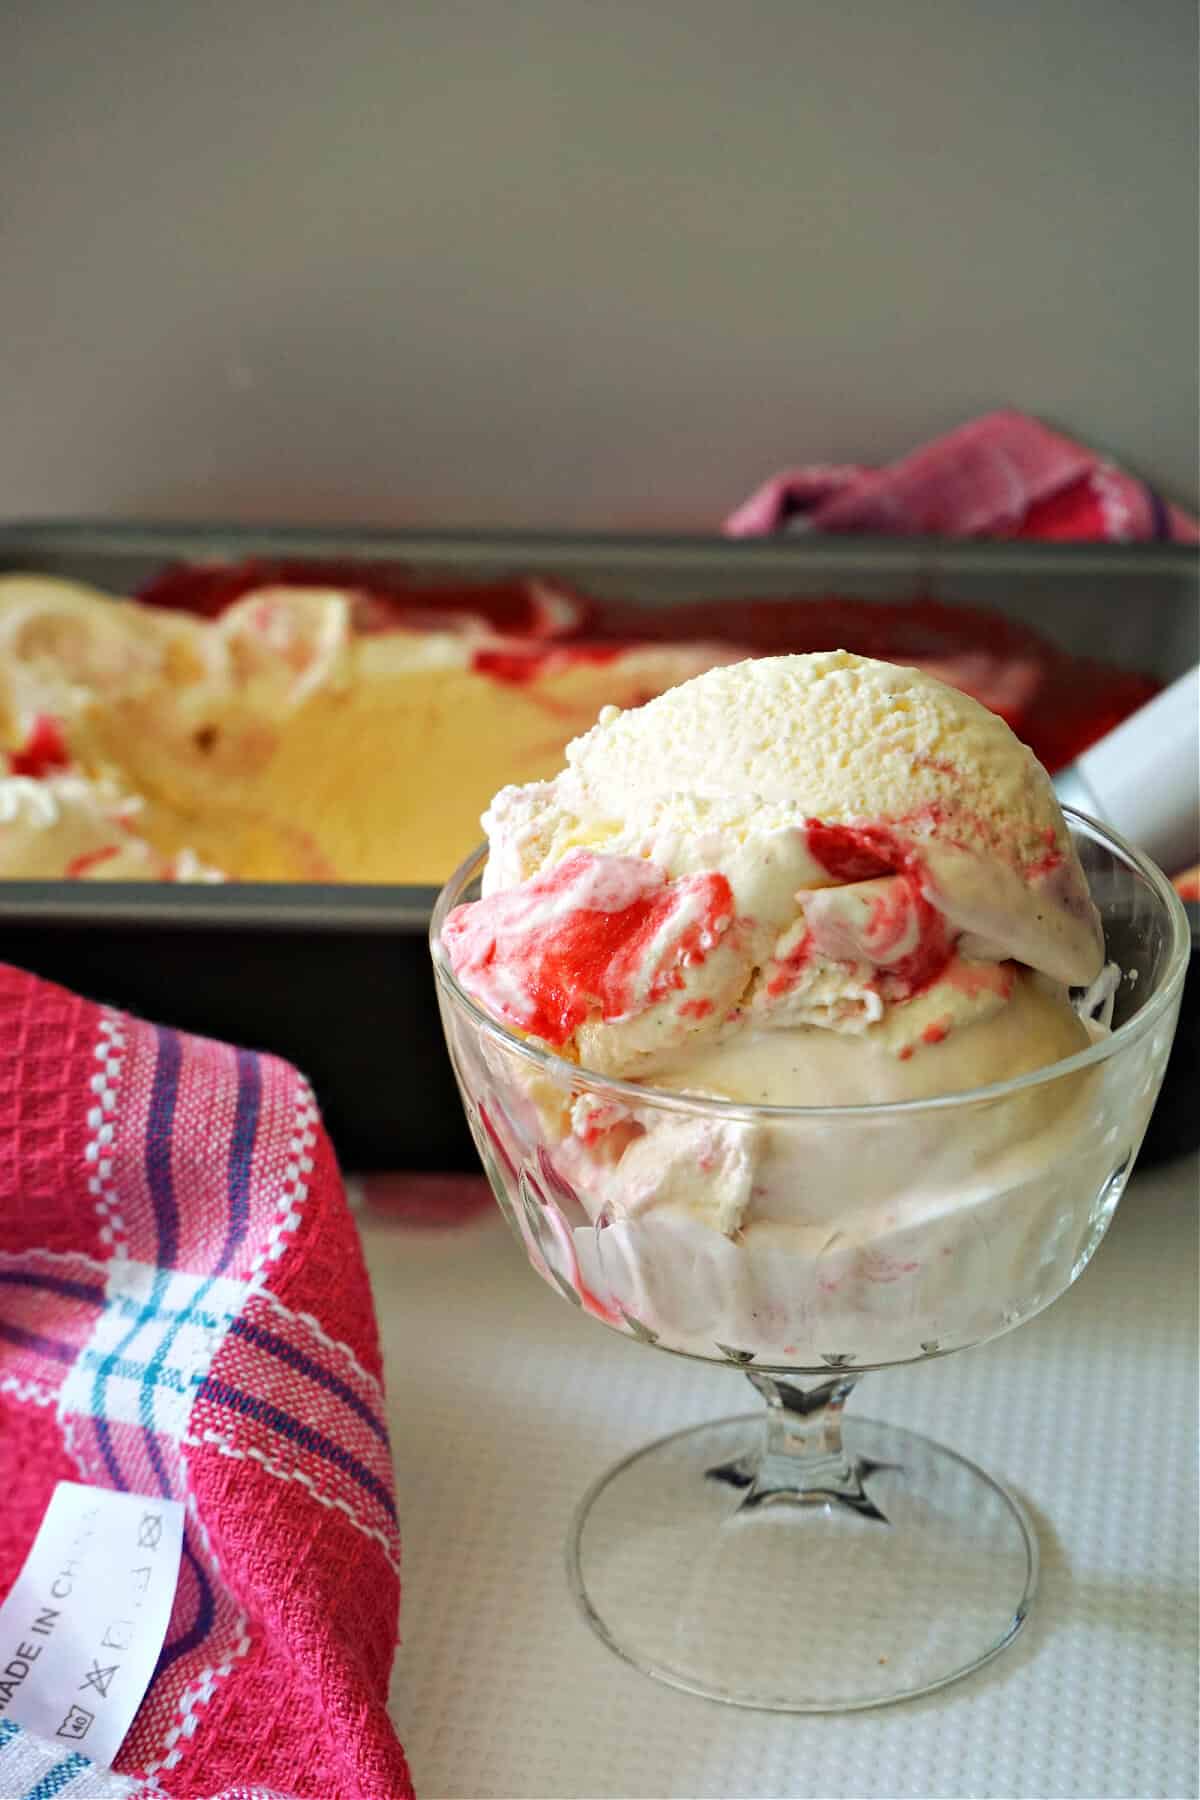 A cup with 2 scoops of raspberry ripple ice cream with a dish with more ice cream in the background.